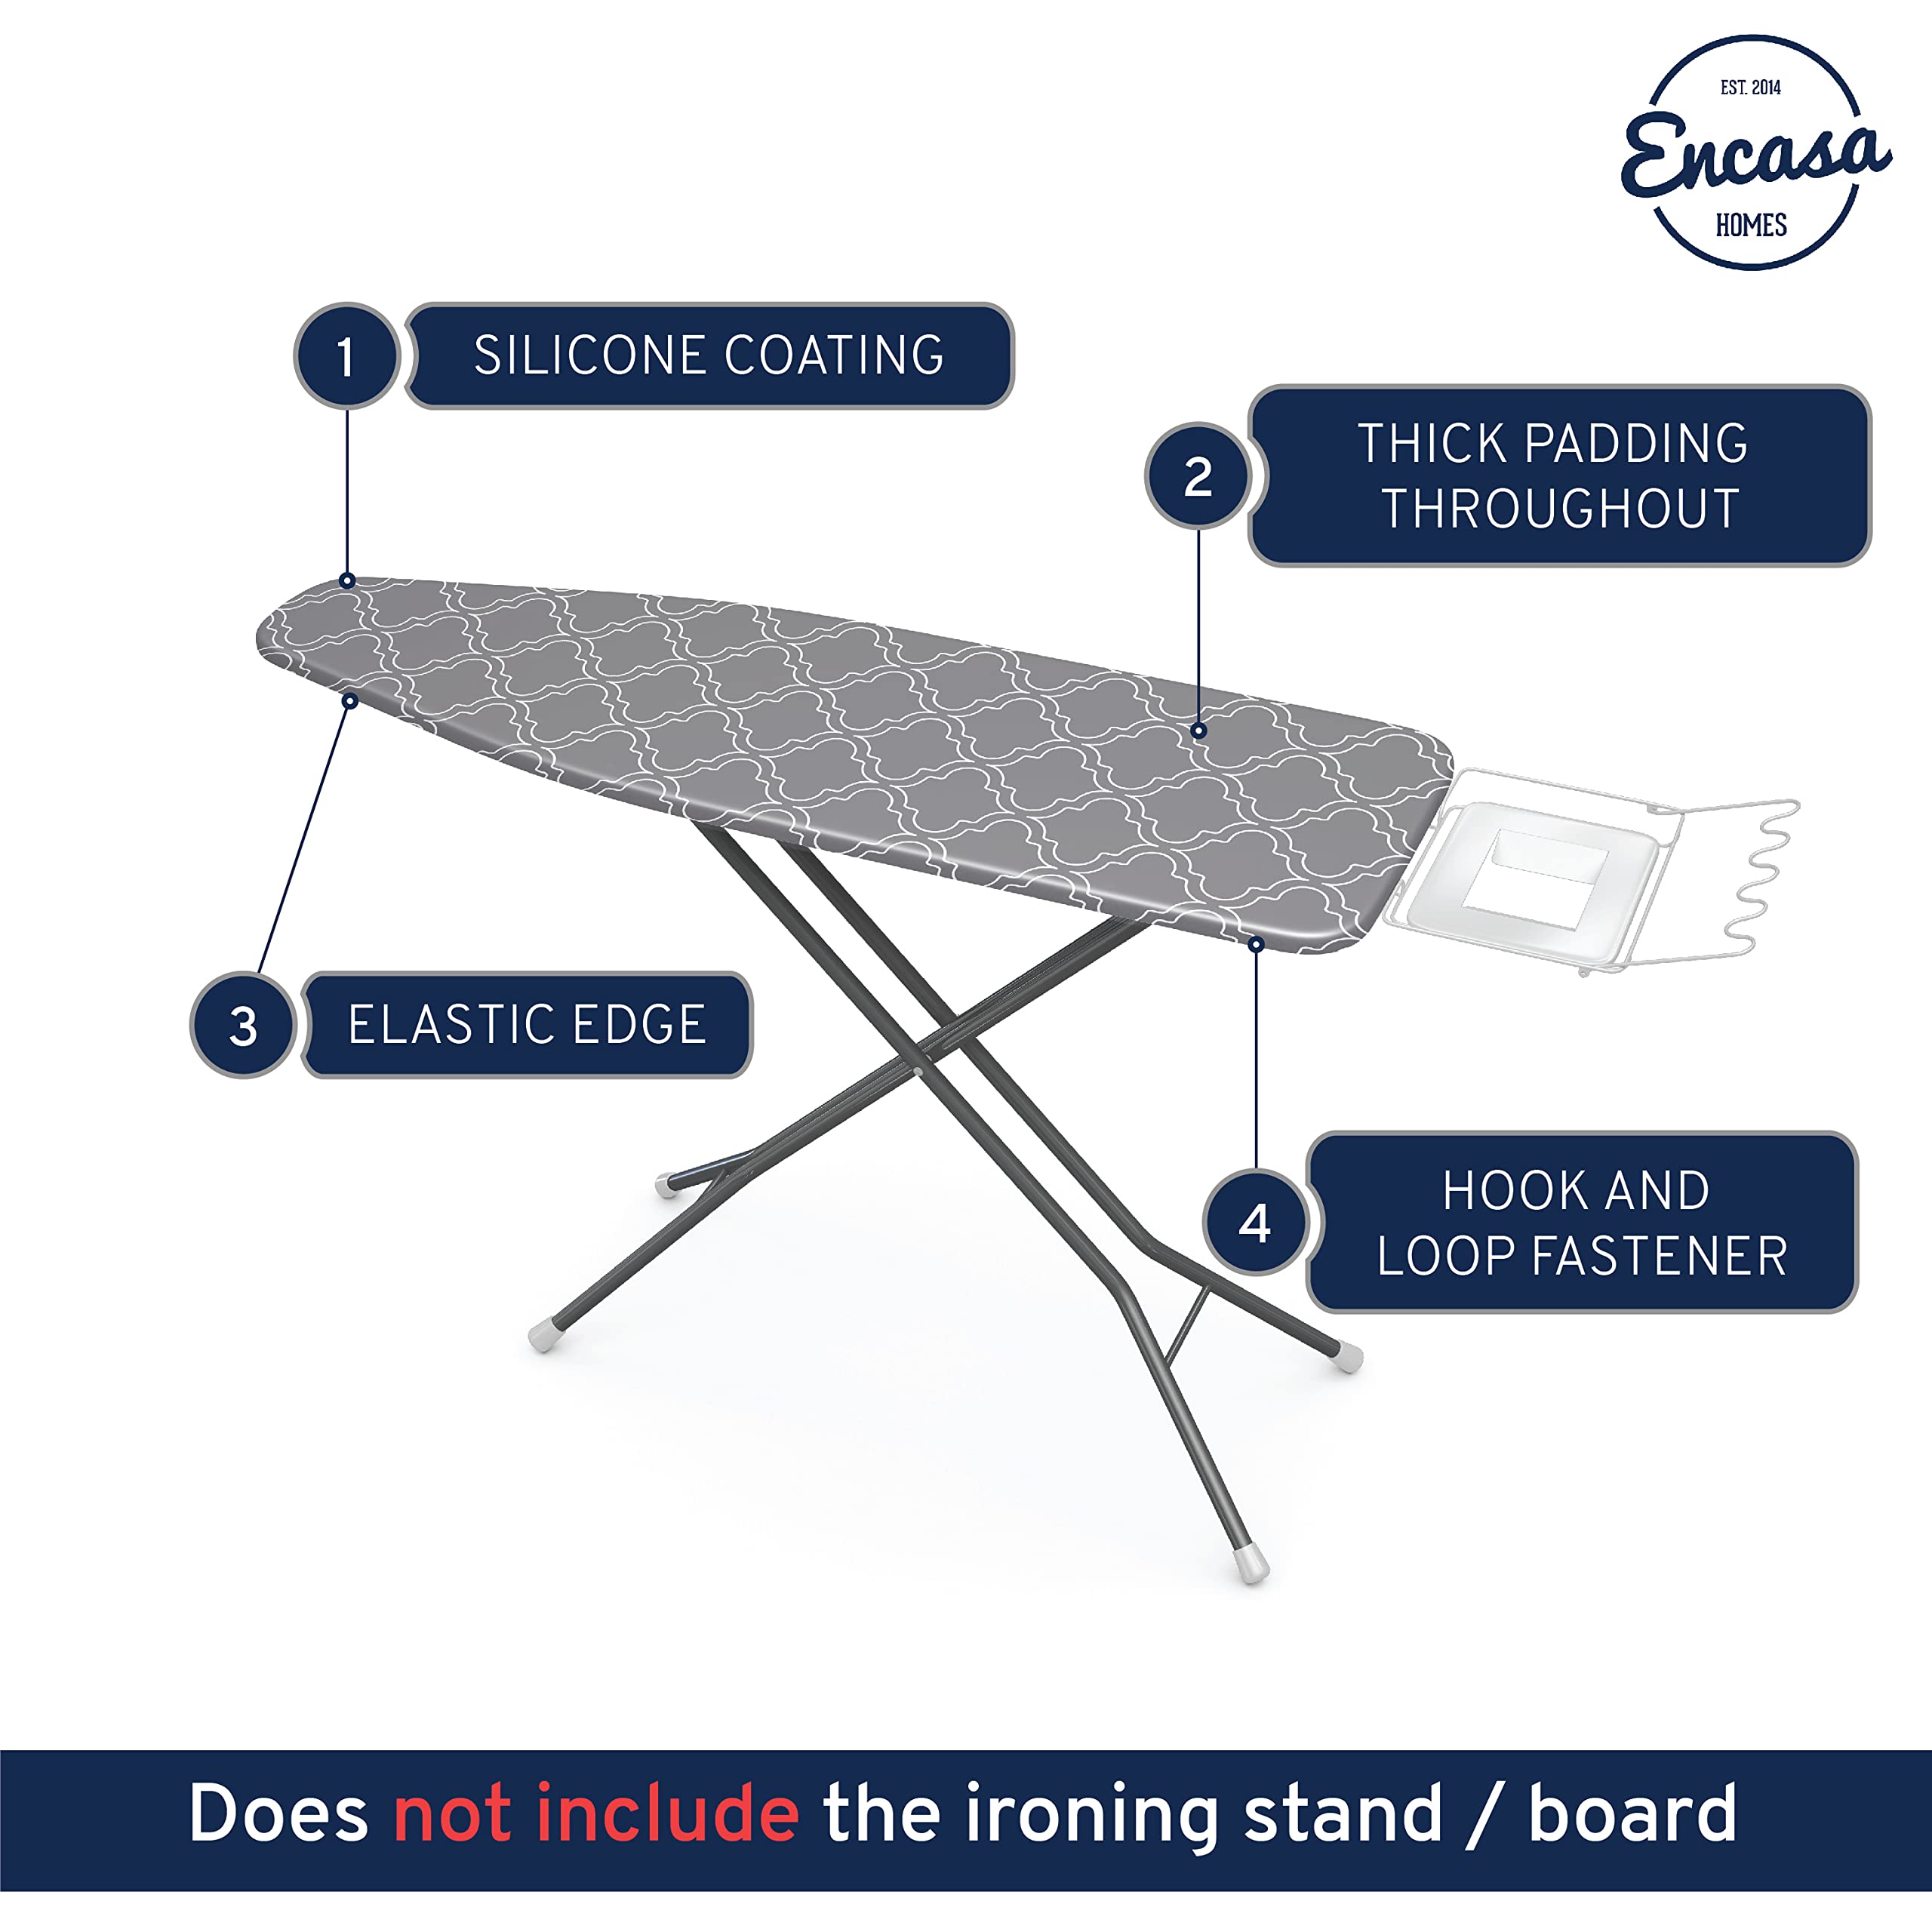 Encasa Homes Ironing Board Cover with 3mm Thick Felt Pad for Steam Press (Fits Standard Medium Boards of 112x34 cm) Heat Reflective, Scorch & Stain Resistant, Printed - Grey Tiles